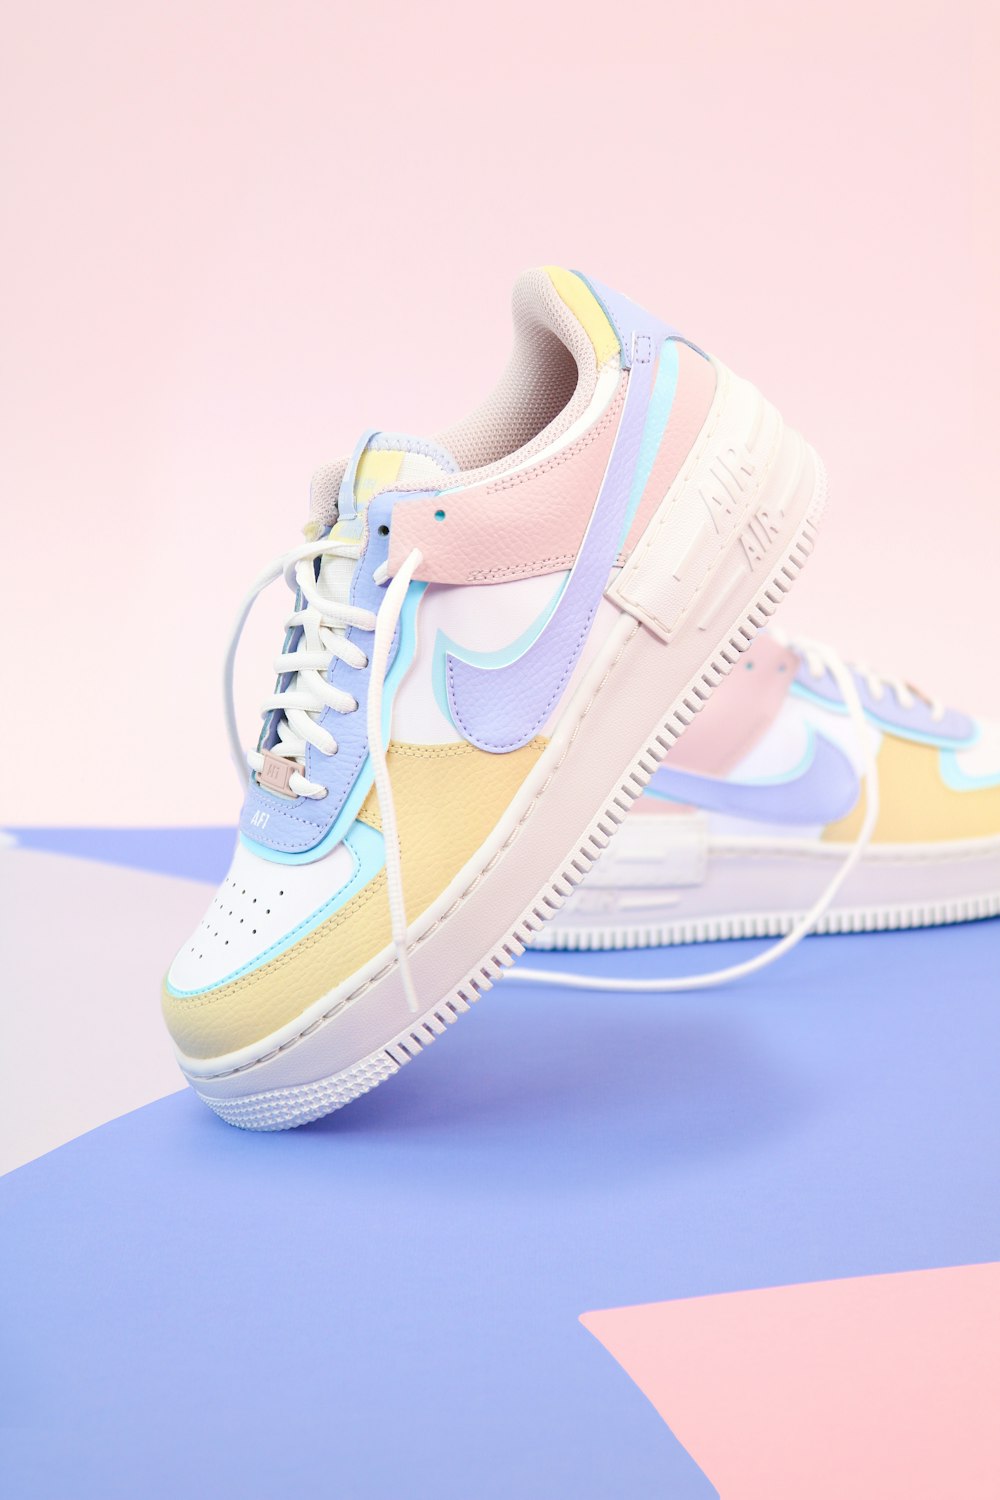 white and blue nike air force 1 high photo – Free Sneaker Image on Unsplash